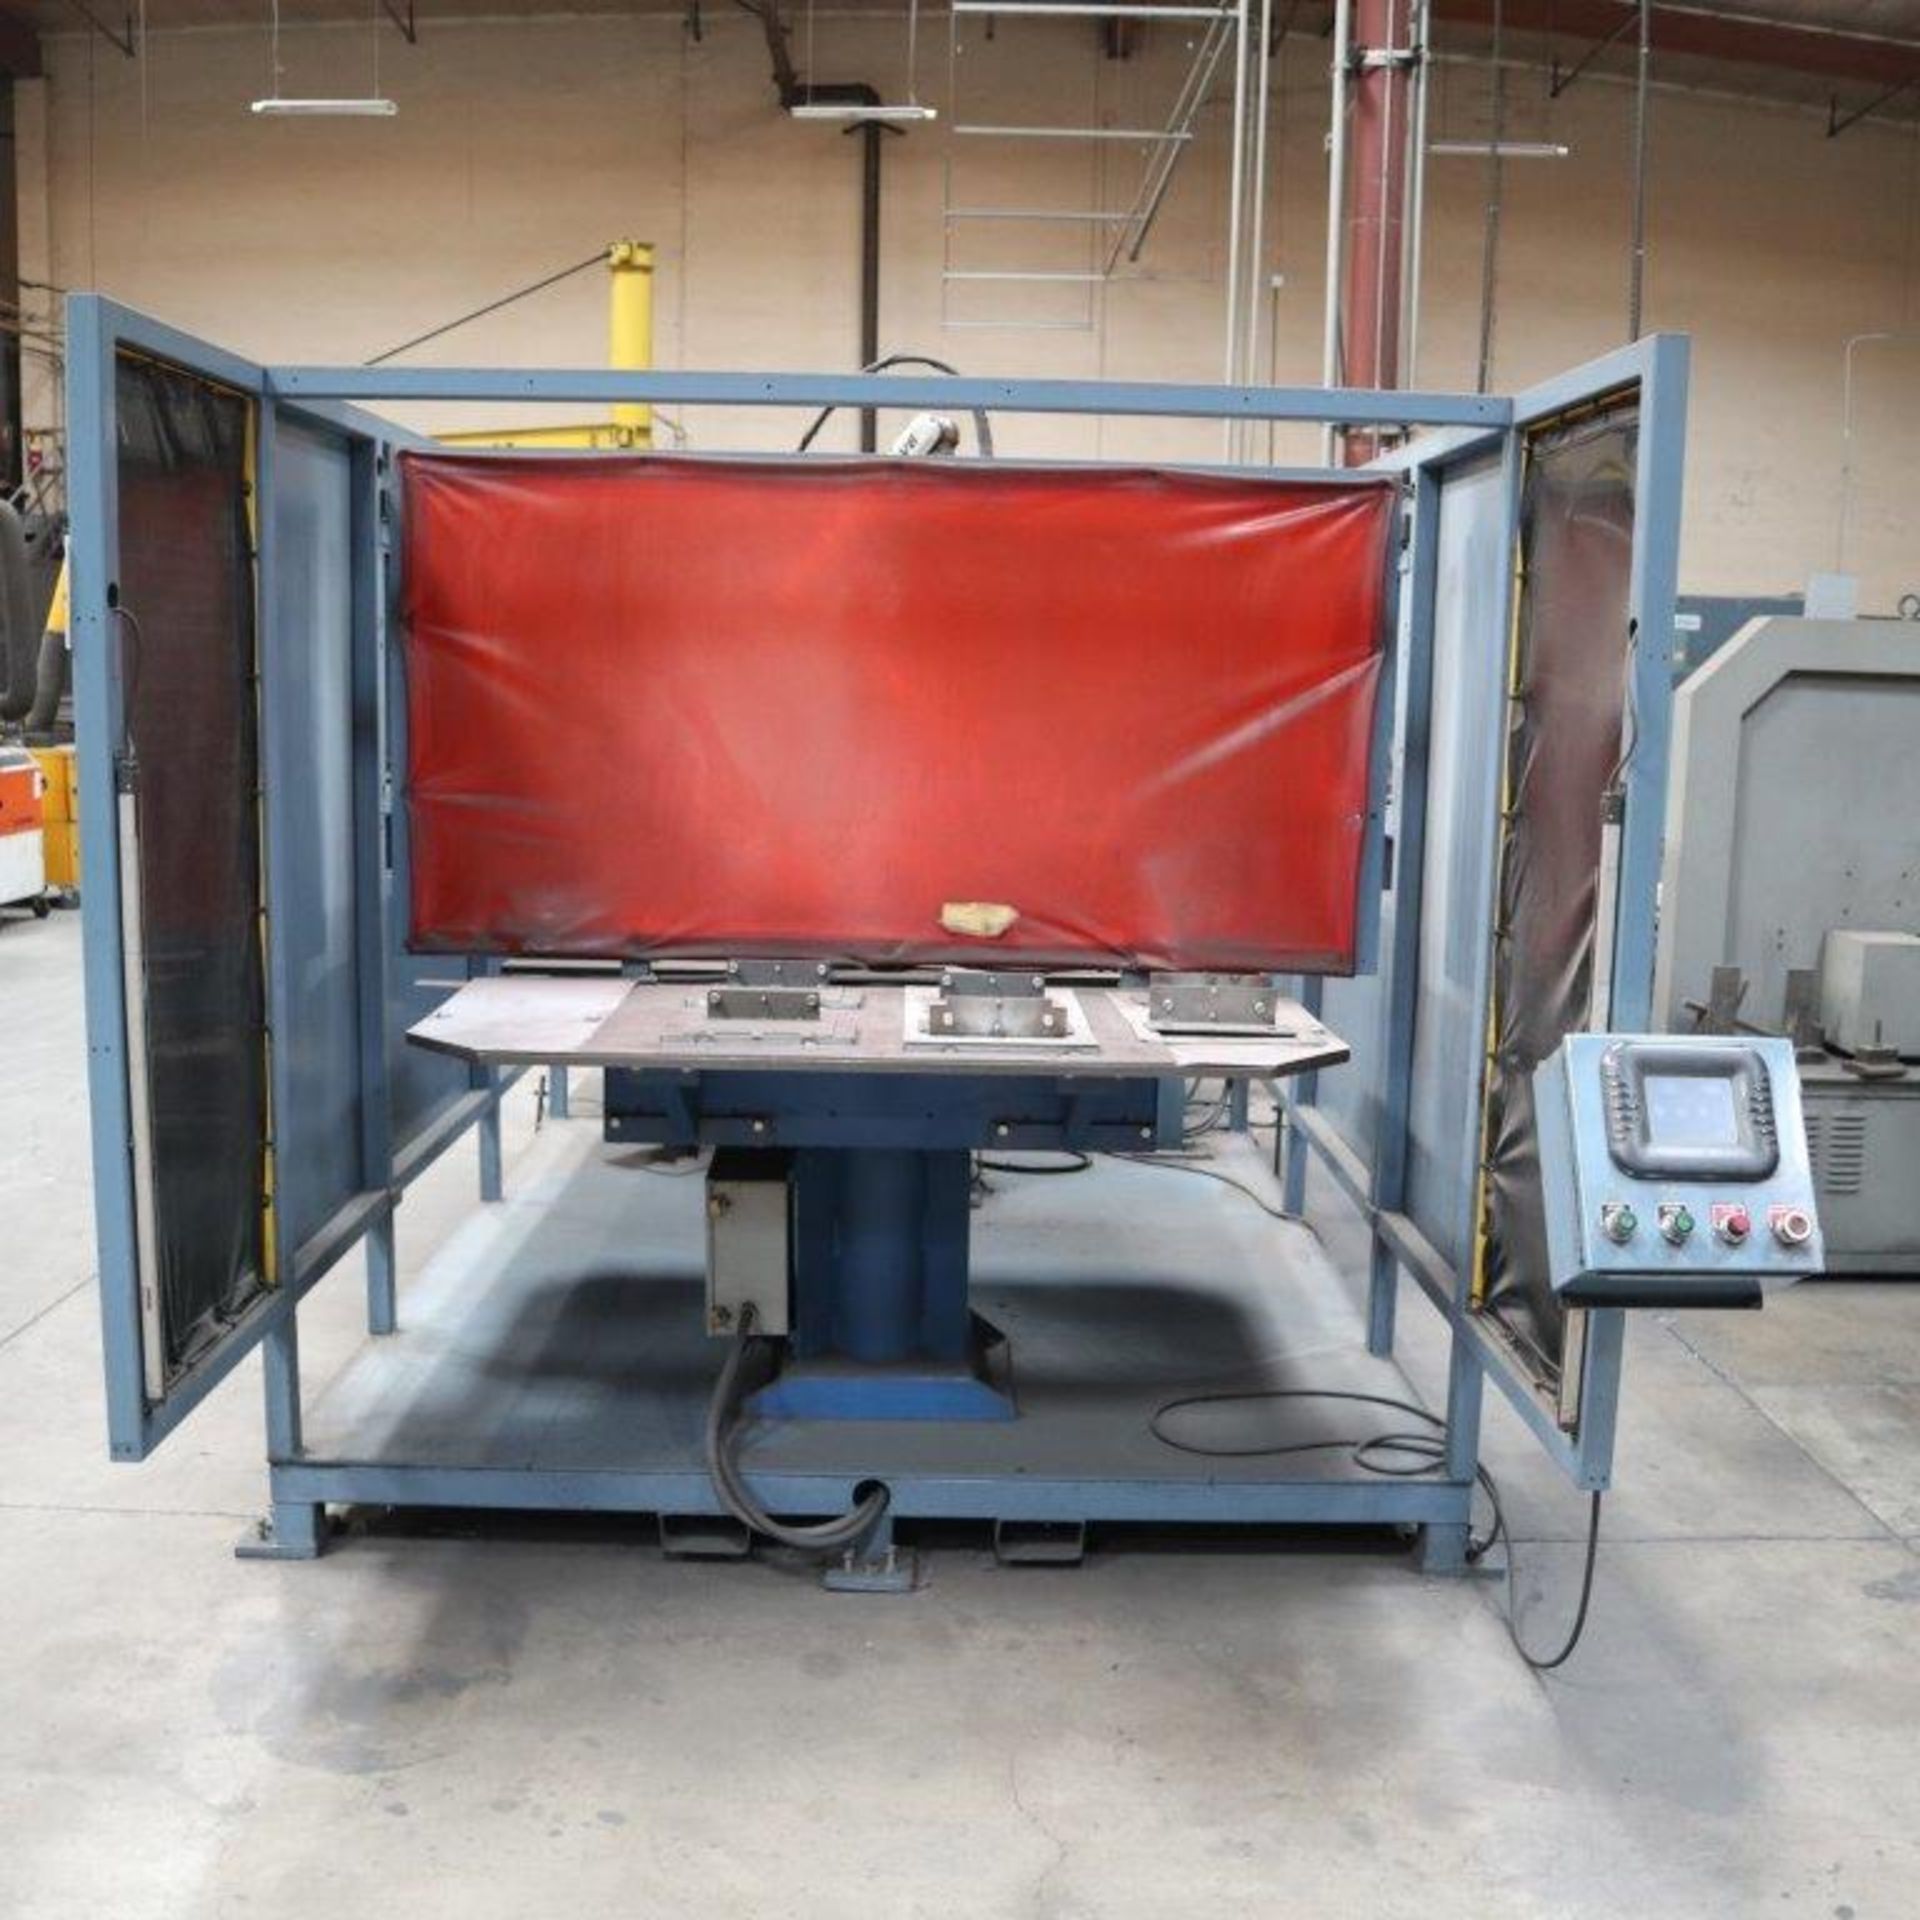 WELDING AUTOMATION LOT WITH ENCLOSURE TO INCLUDE: (1) 2002 ALMEGA ROBOT MANIPULATOR EX-V6, S/N - Image 4 of 10